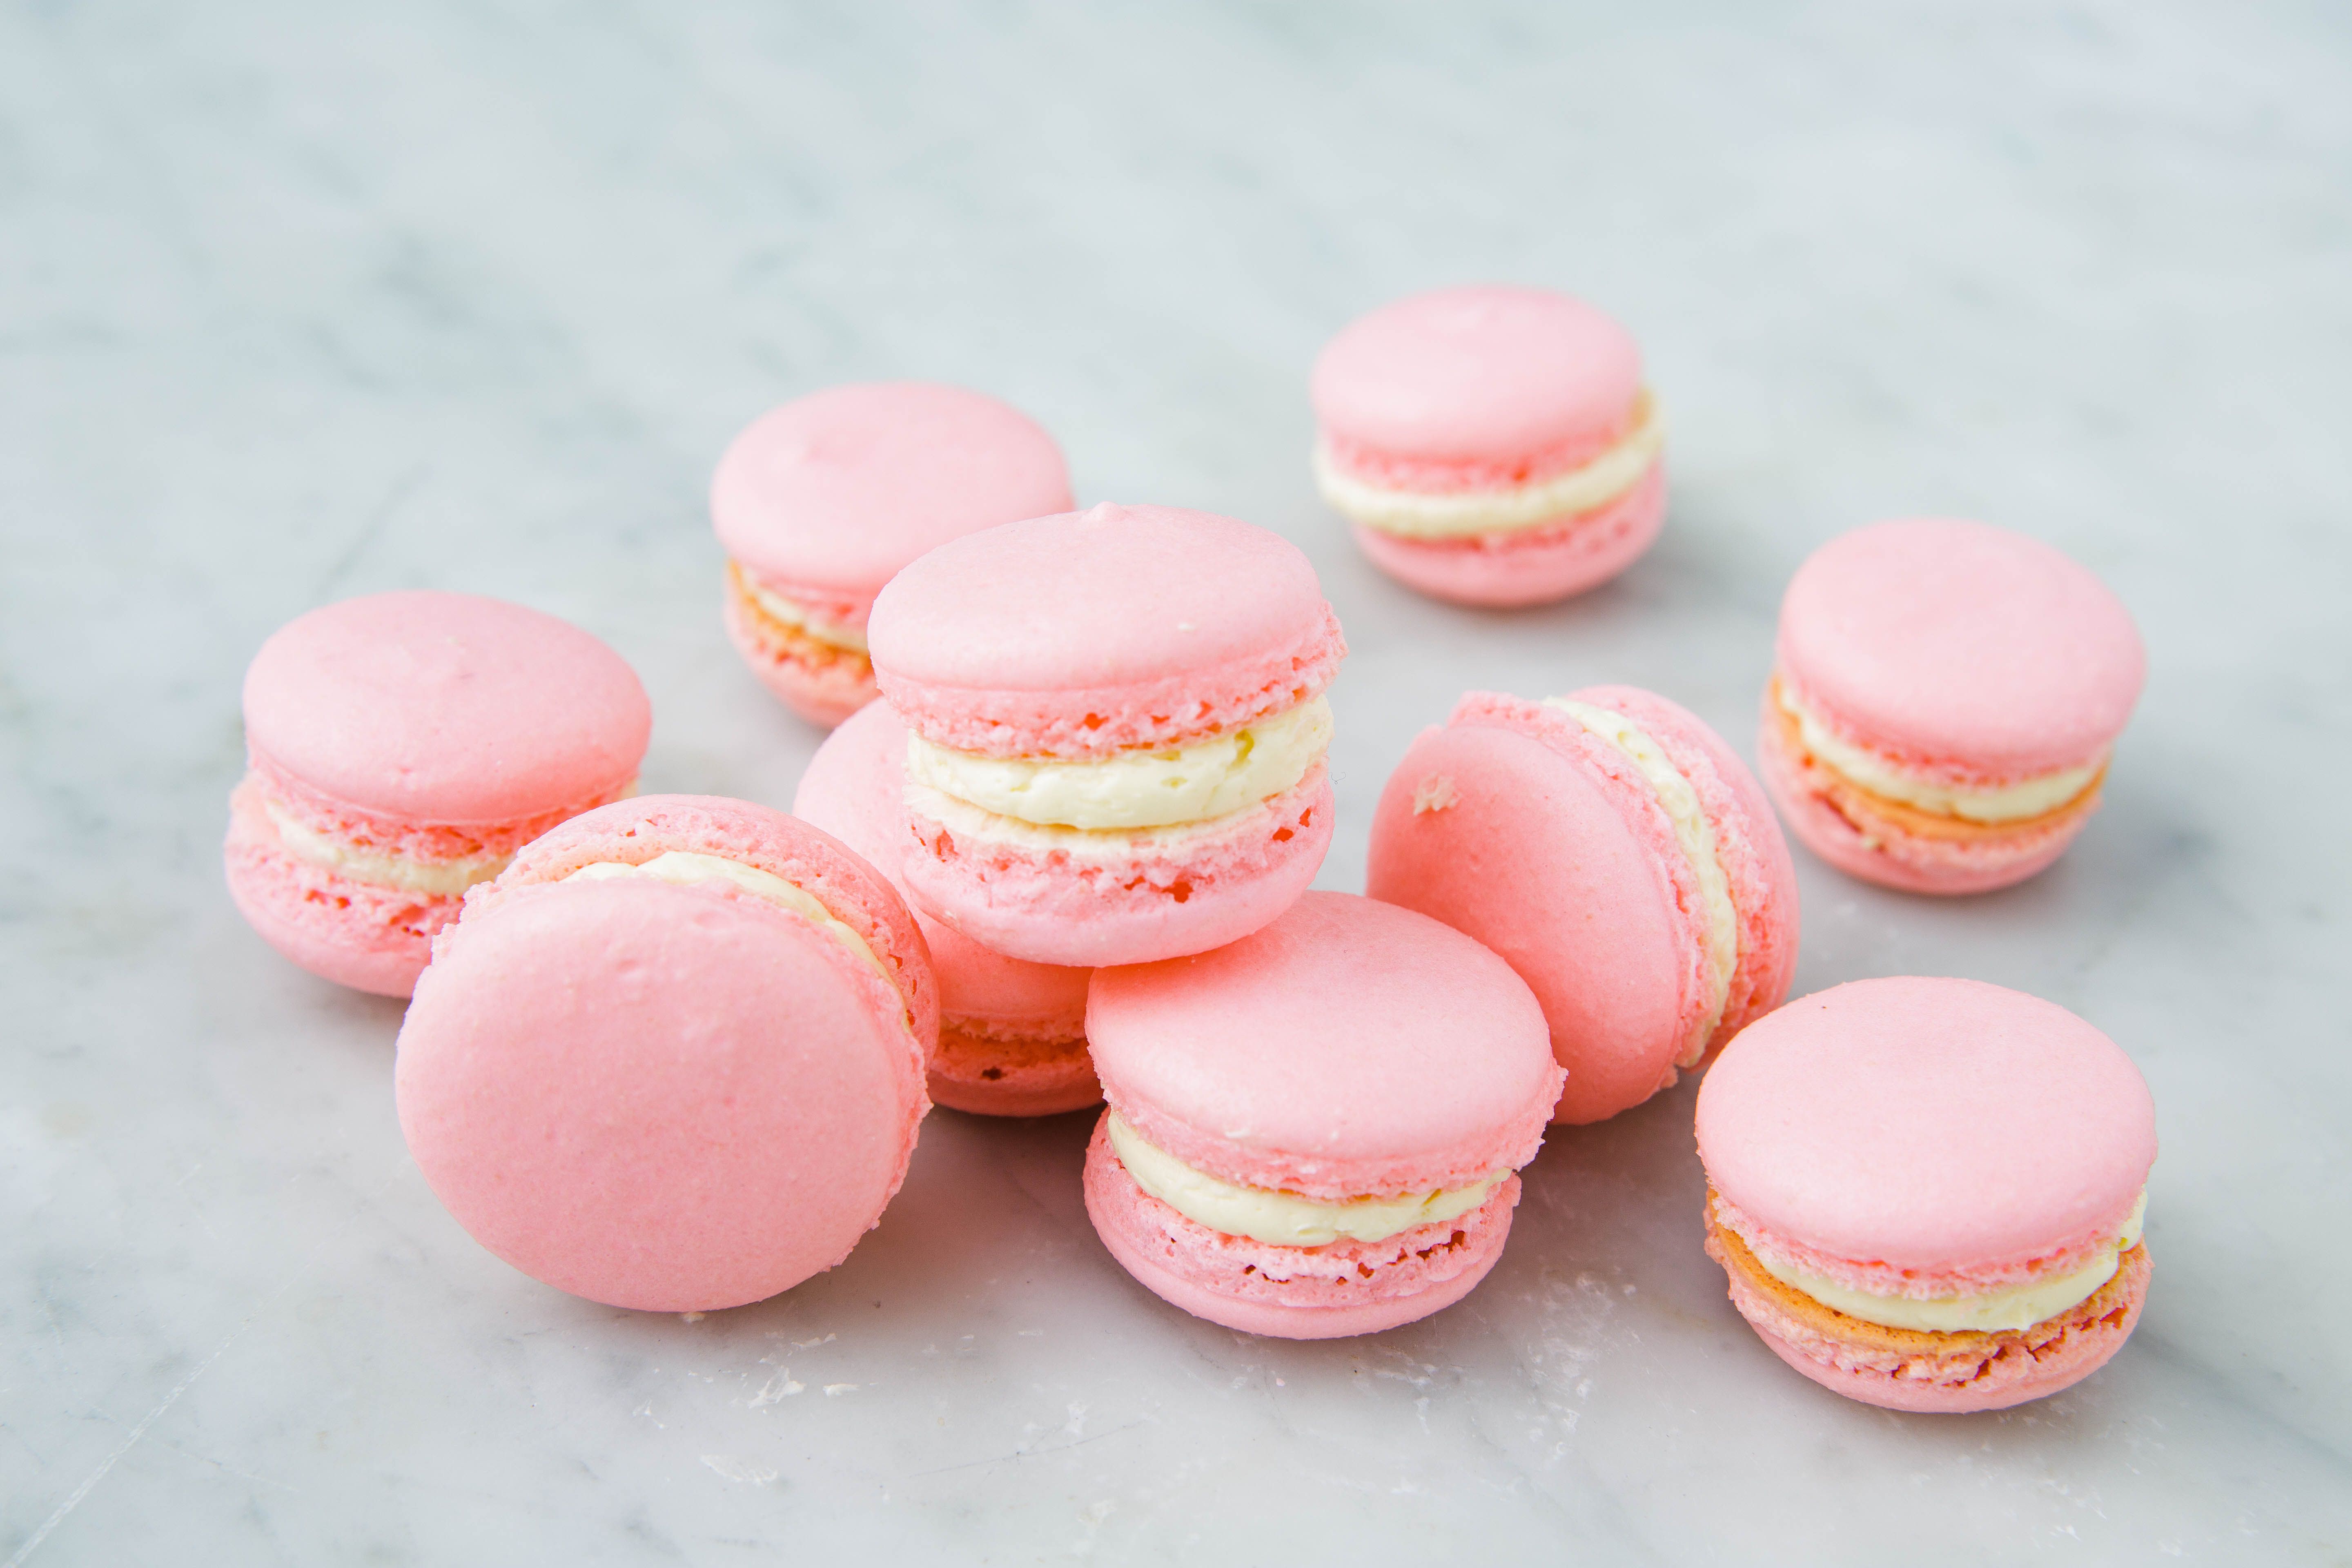 Best French Macarons Recipe - How To Make French Macarons.